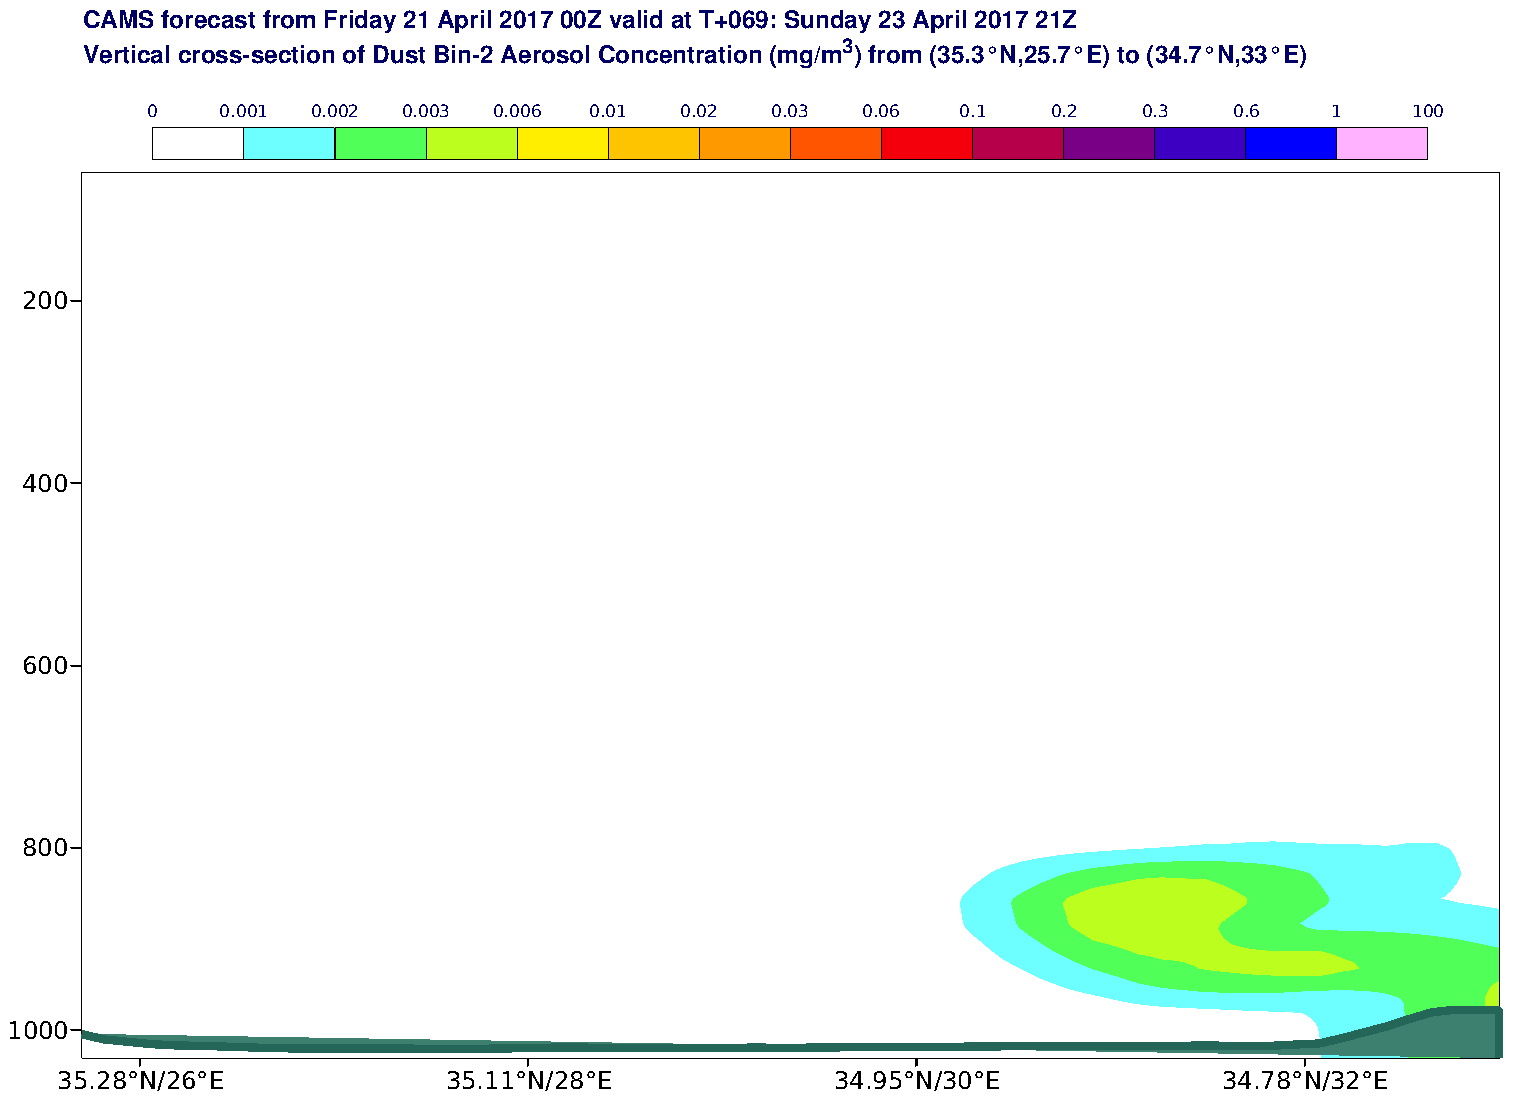 Vertical cross-section of Dust Bin-2 Aerosol Concentration (mg/m3) valid at T69 - 2017-04-23 21:00